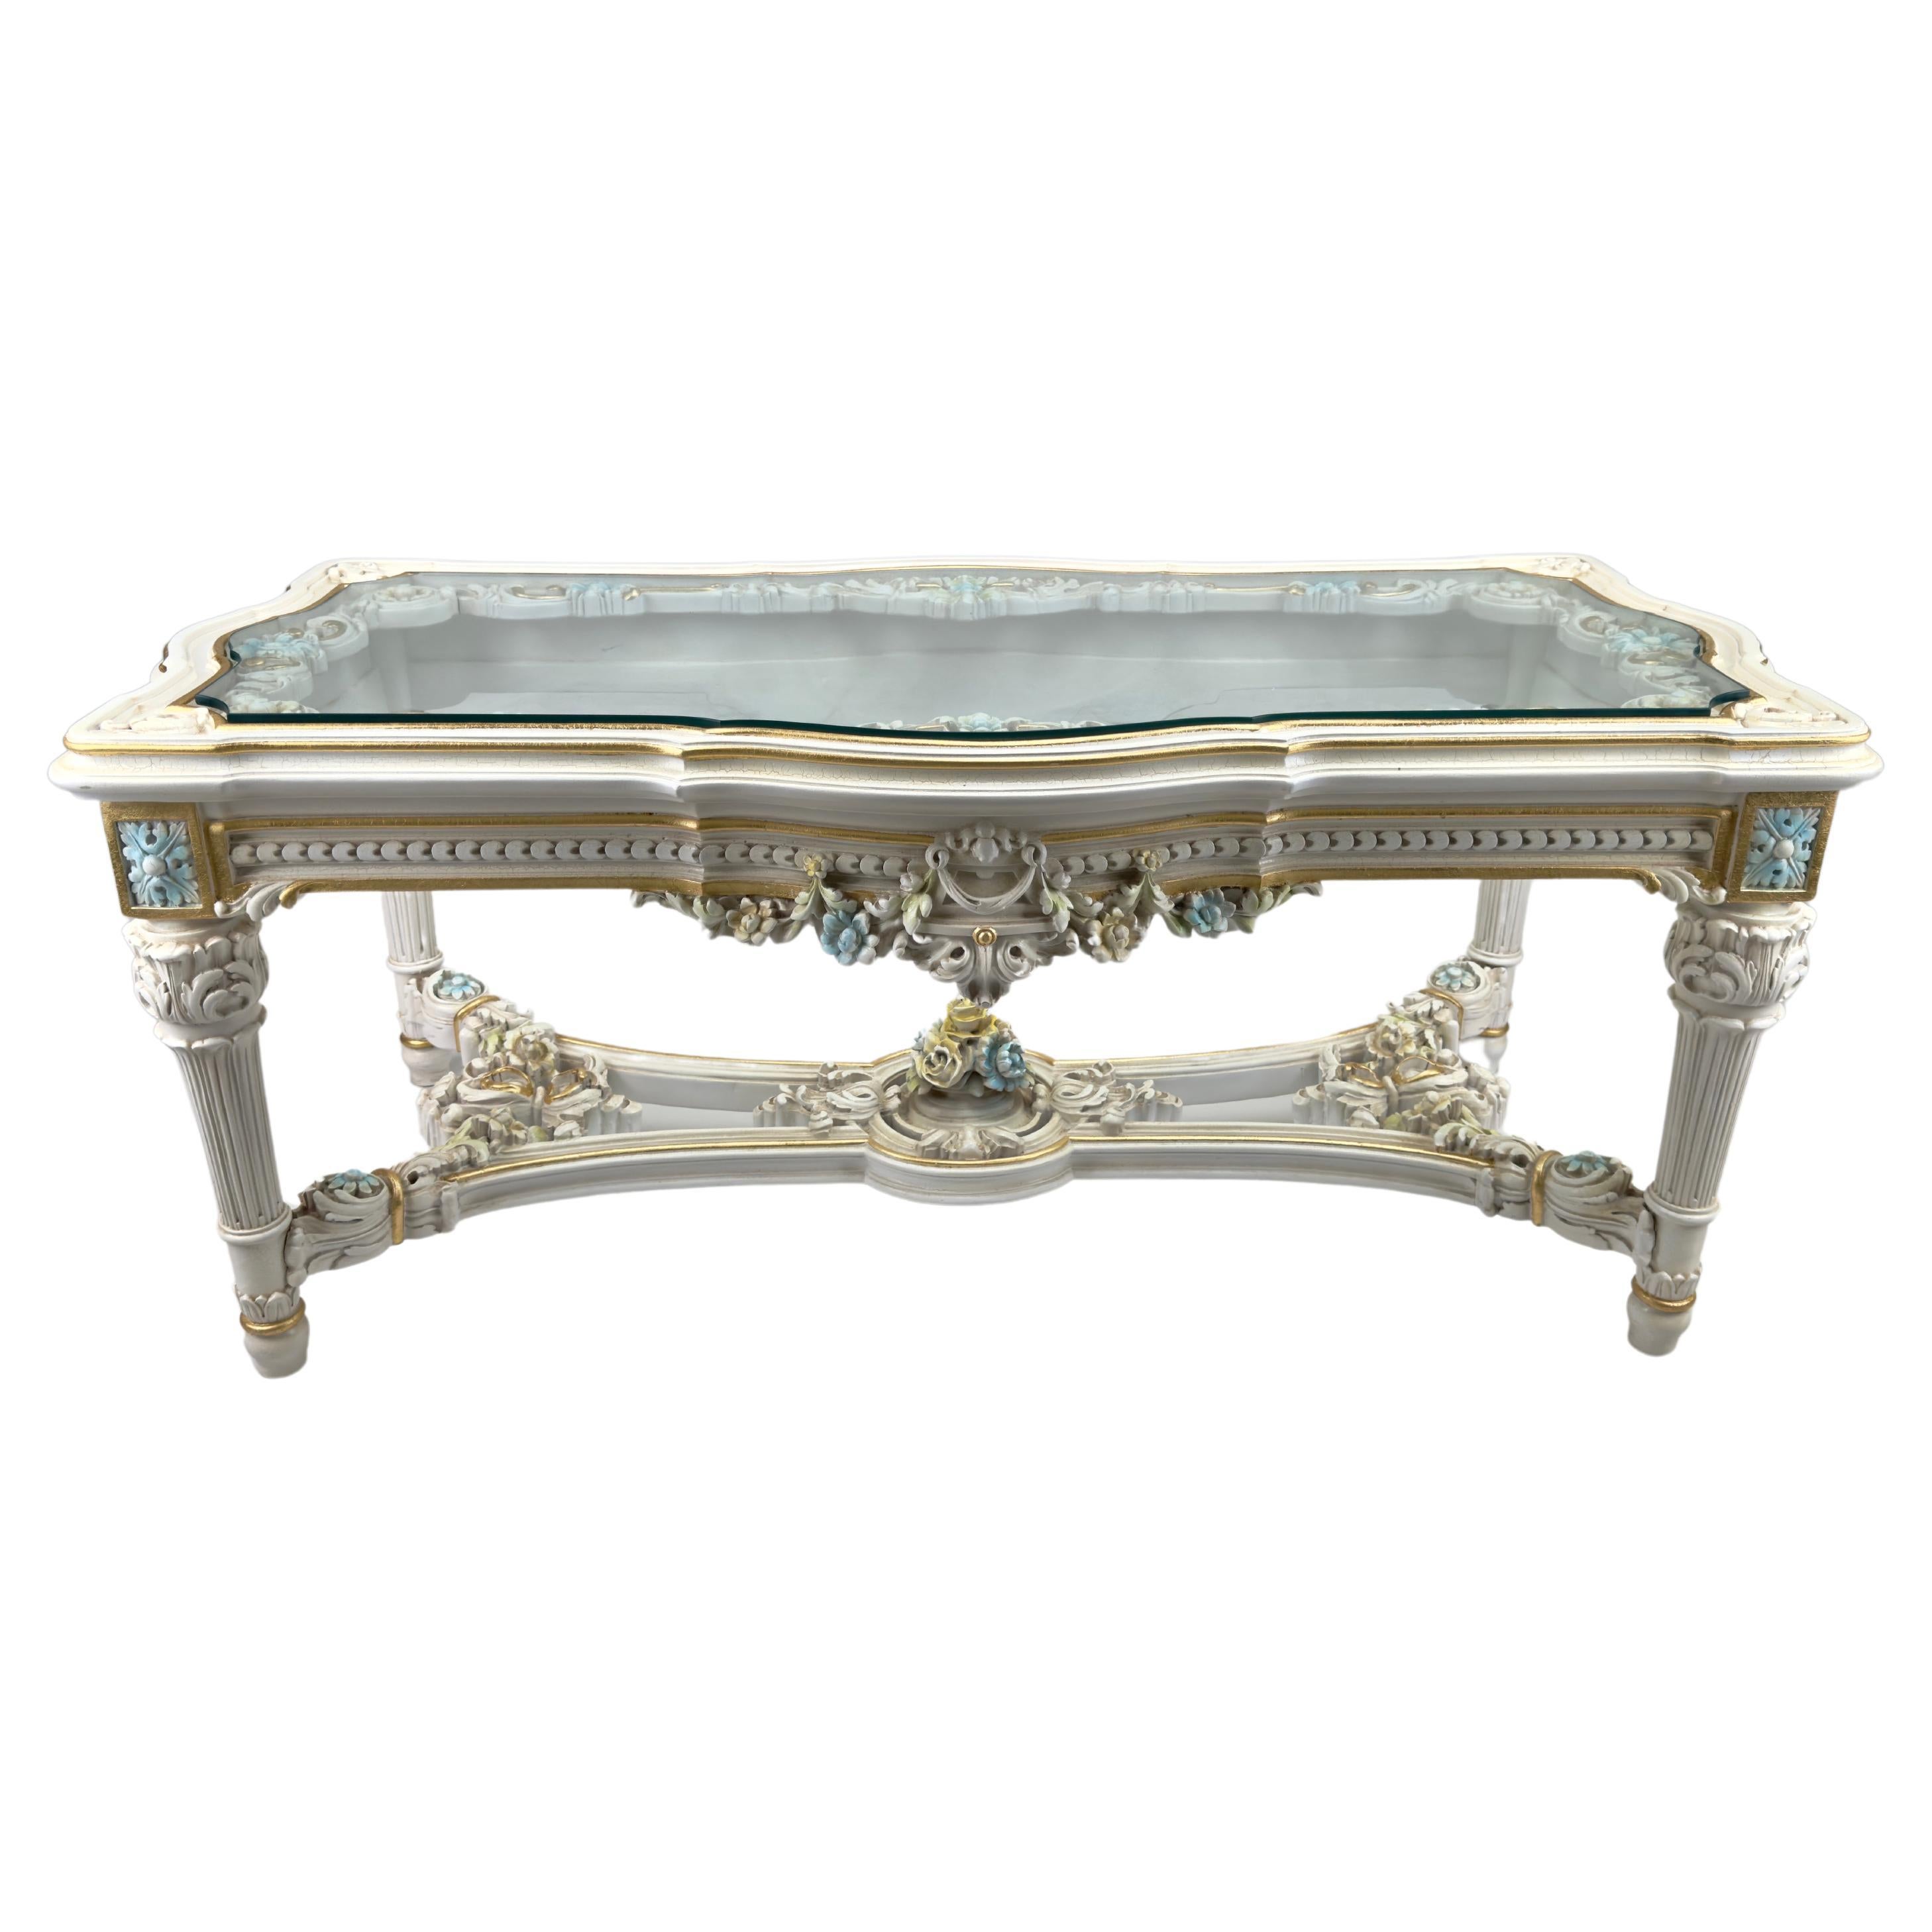 Italian Neo-Classical Baroque Style Floral Design Coffee or Cocktail Table 